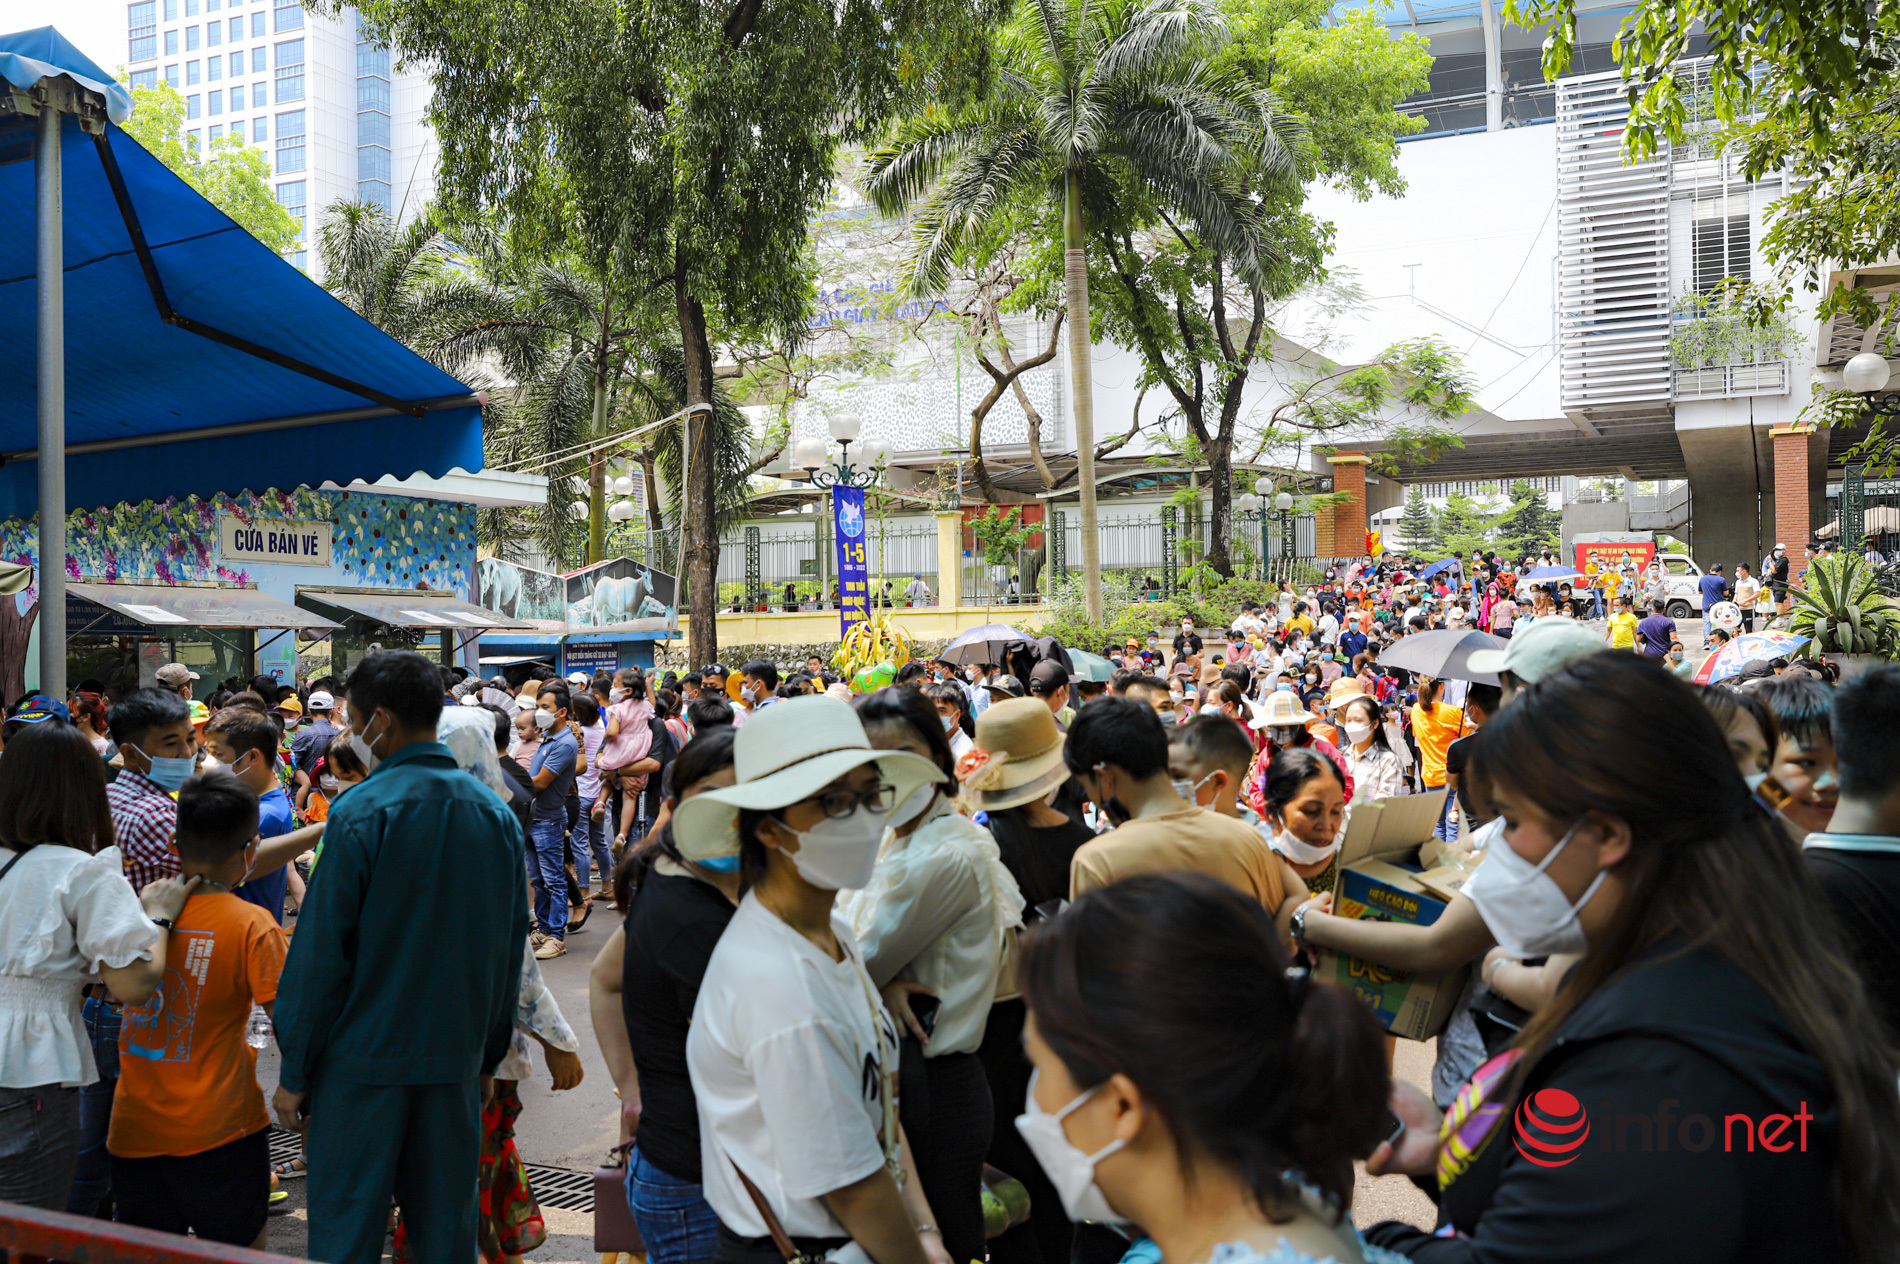 Tens of thousands of people flocked to Thu Le Park on the first public holiday